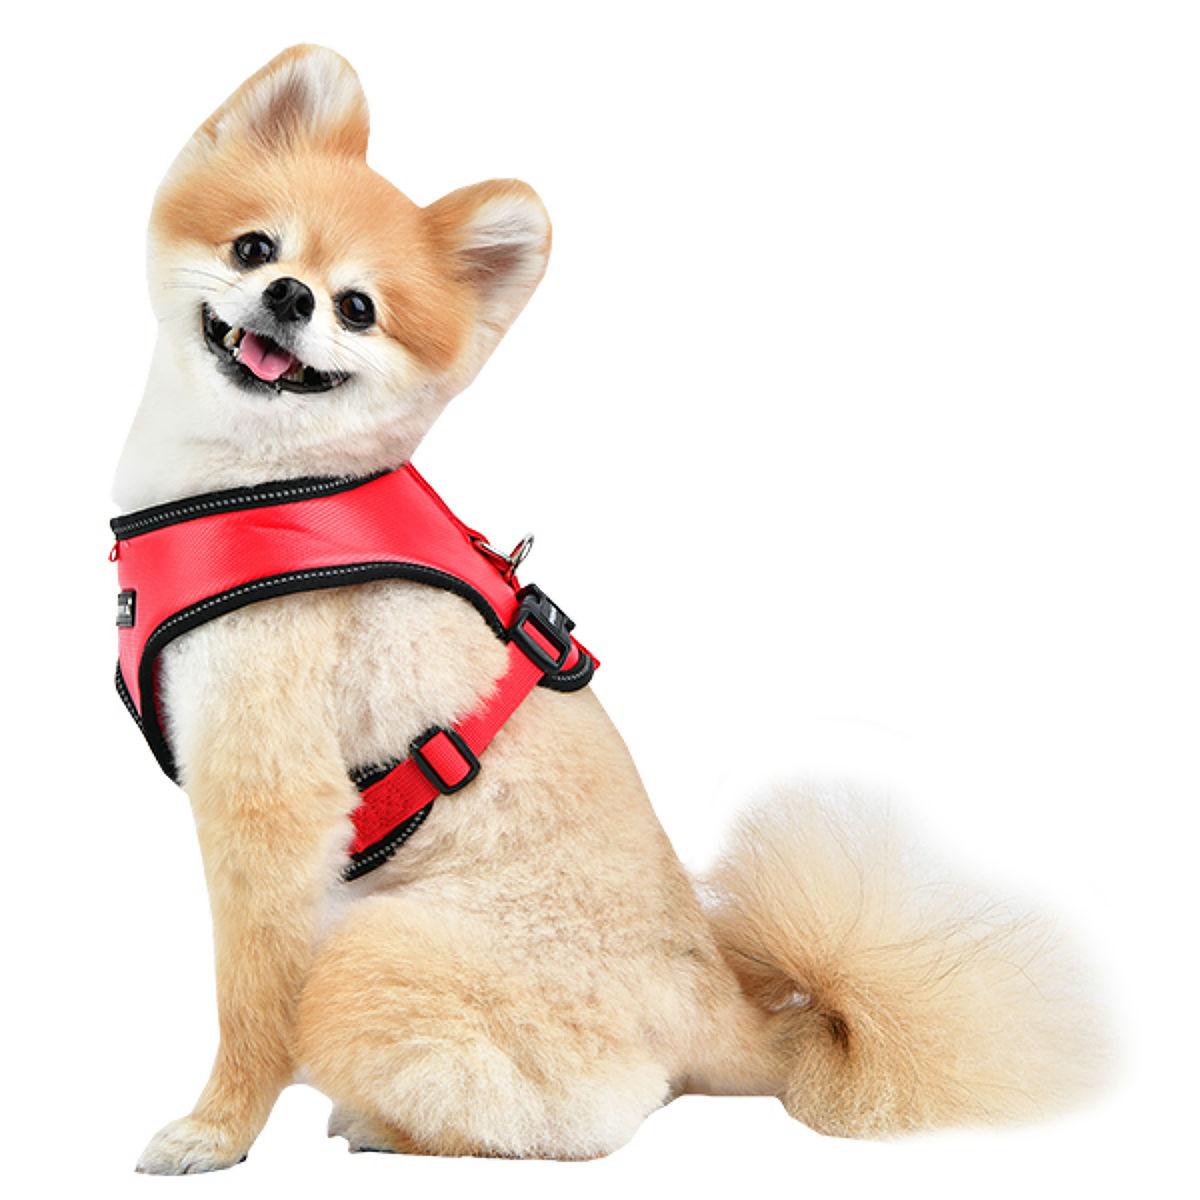 Legacy Snugfit Dog Harness By Puppia - Red